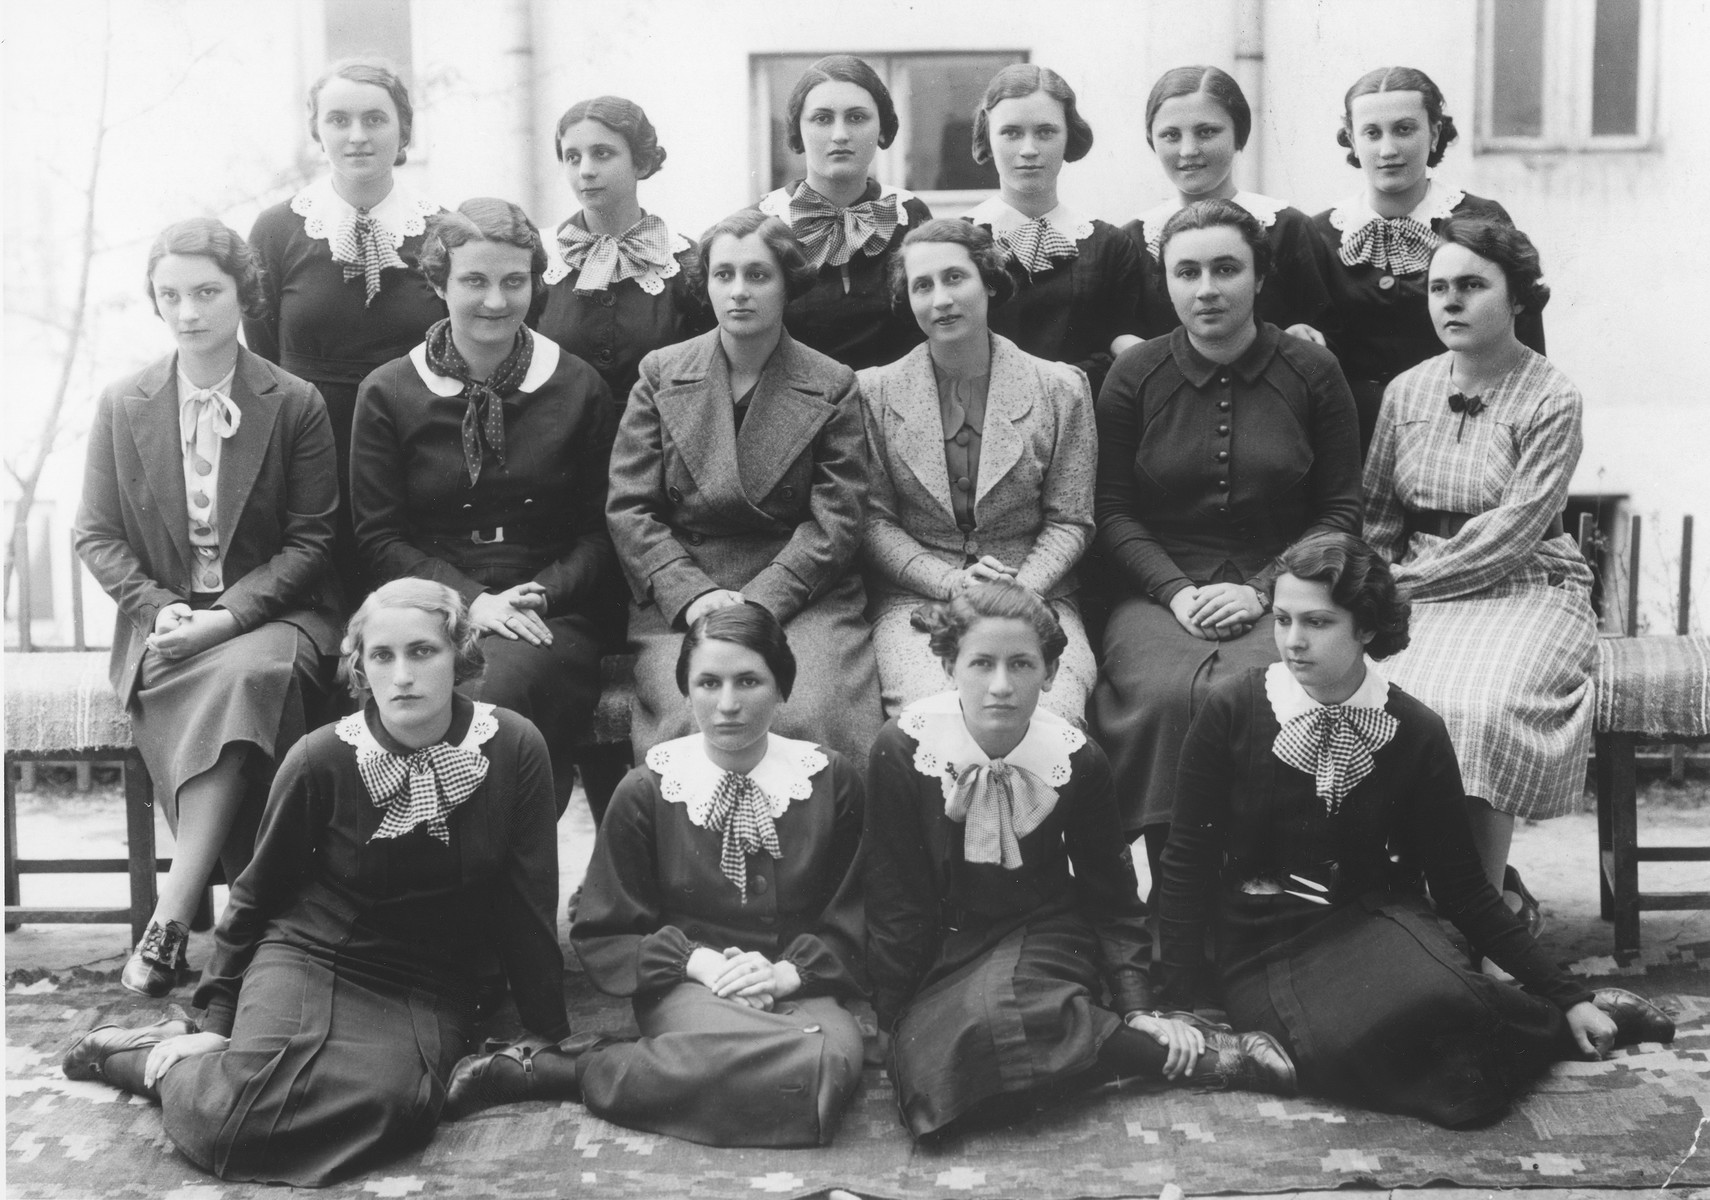 Lotte Gottfried (front row, left) and her graduating class at the Hoffmann gymnasium in Czernowitz.